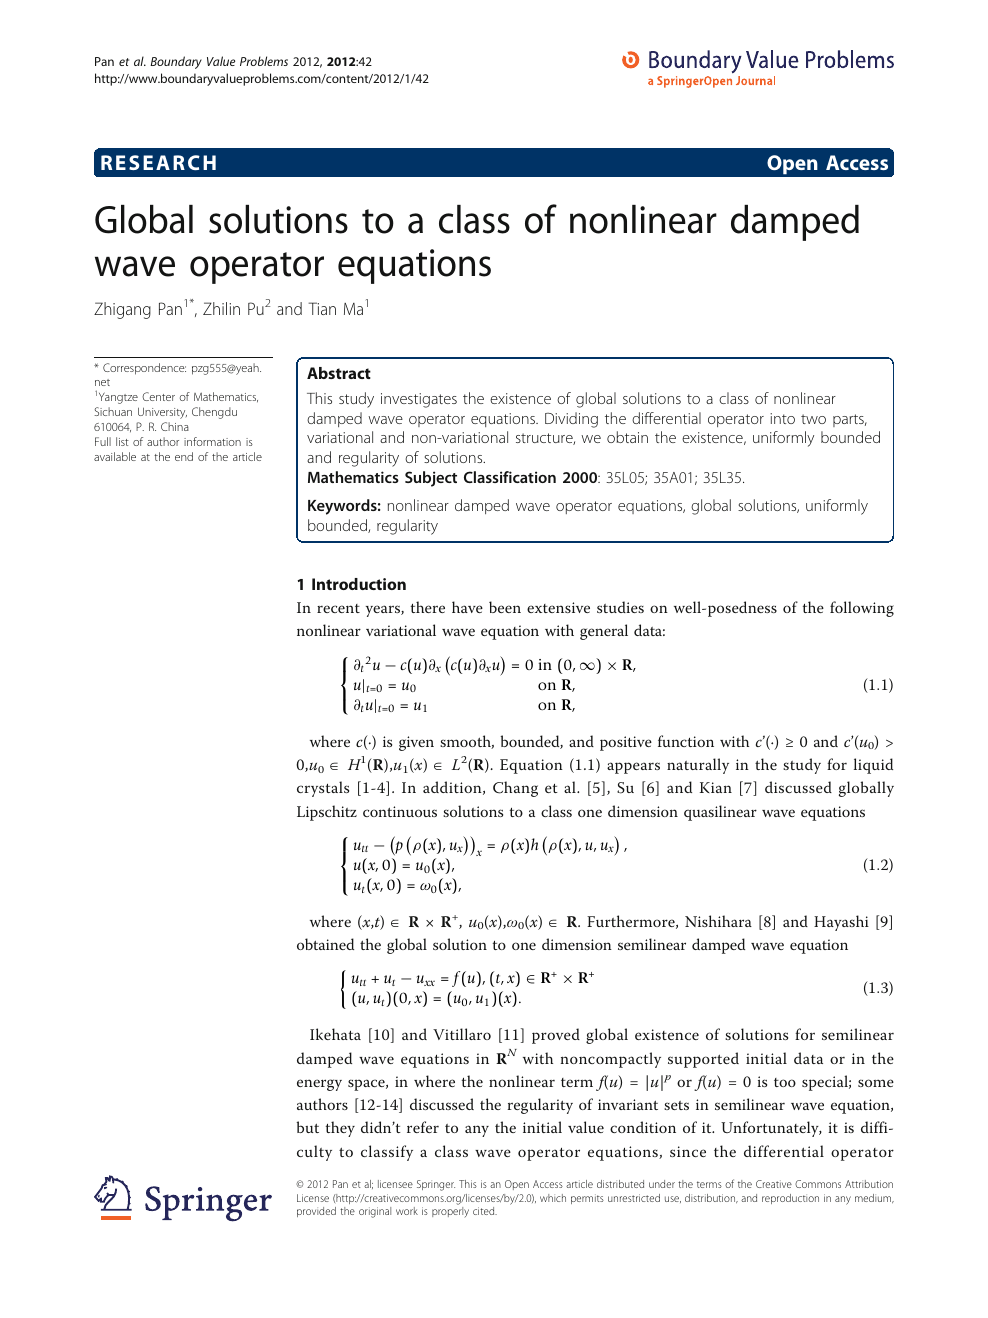 Global Solutions To A Class Of Nonlinear Damped Wave Operator Equations Topic Of Research Paper In Mathematics Download Scholarly Article Pdf And Read For Free On Cyberleninka Open Science Hub